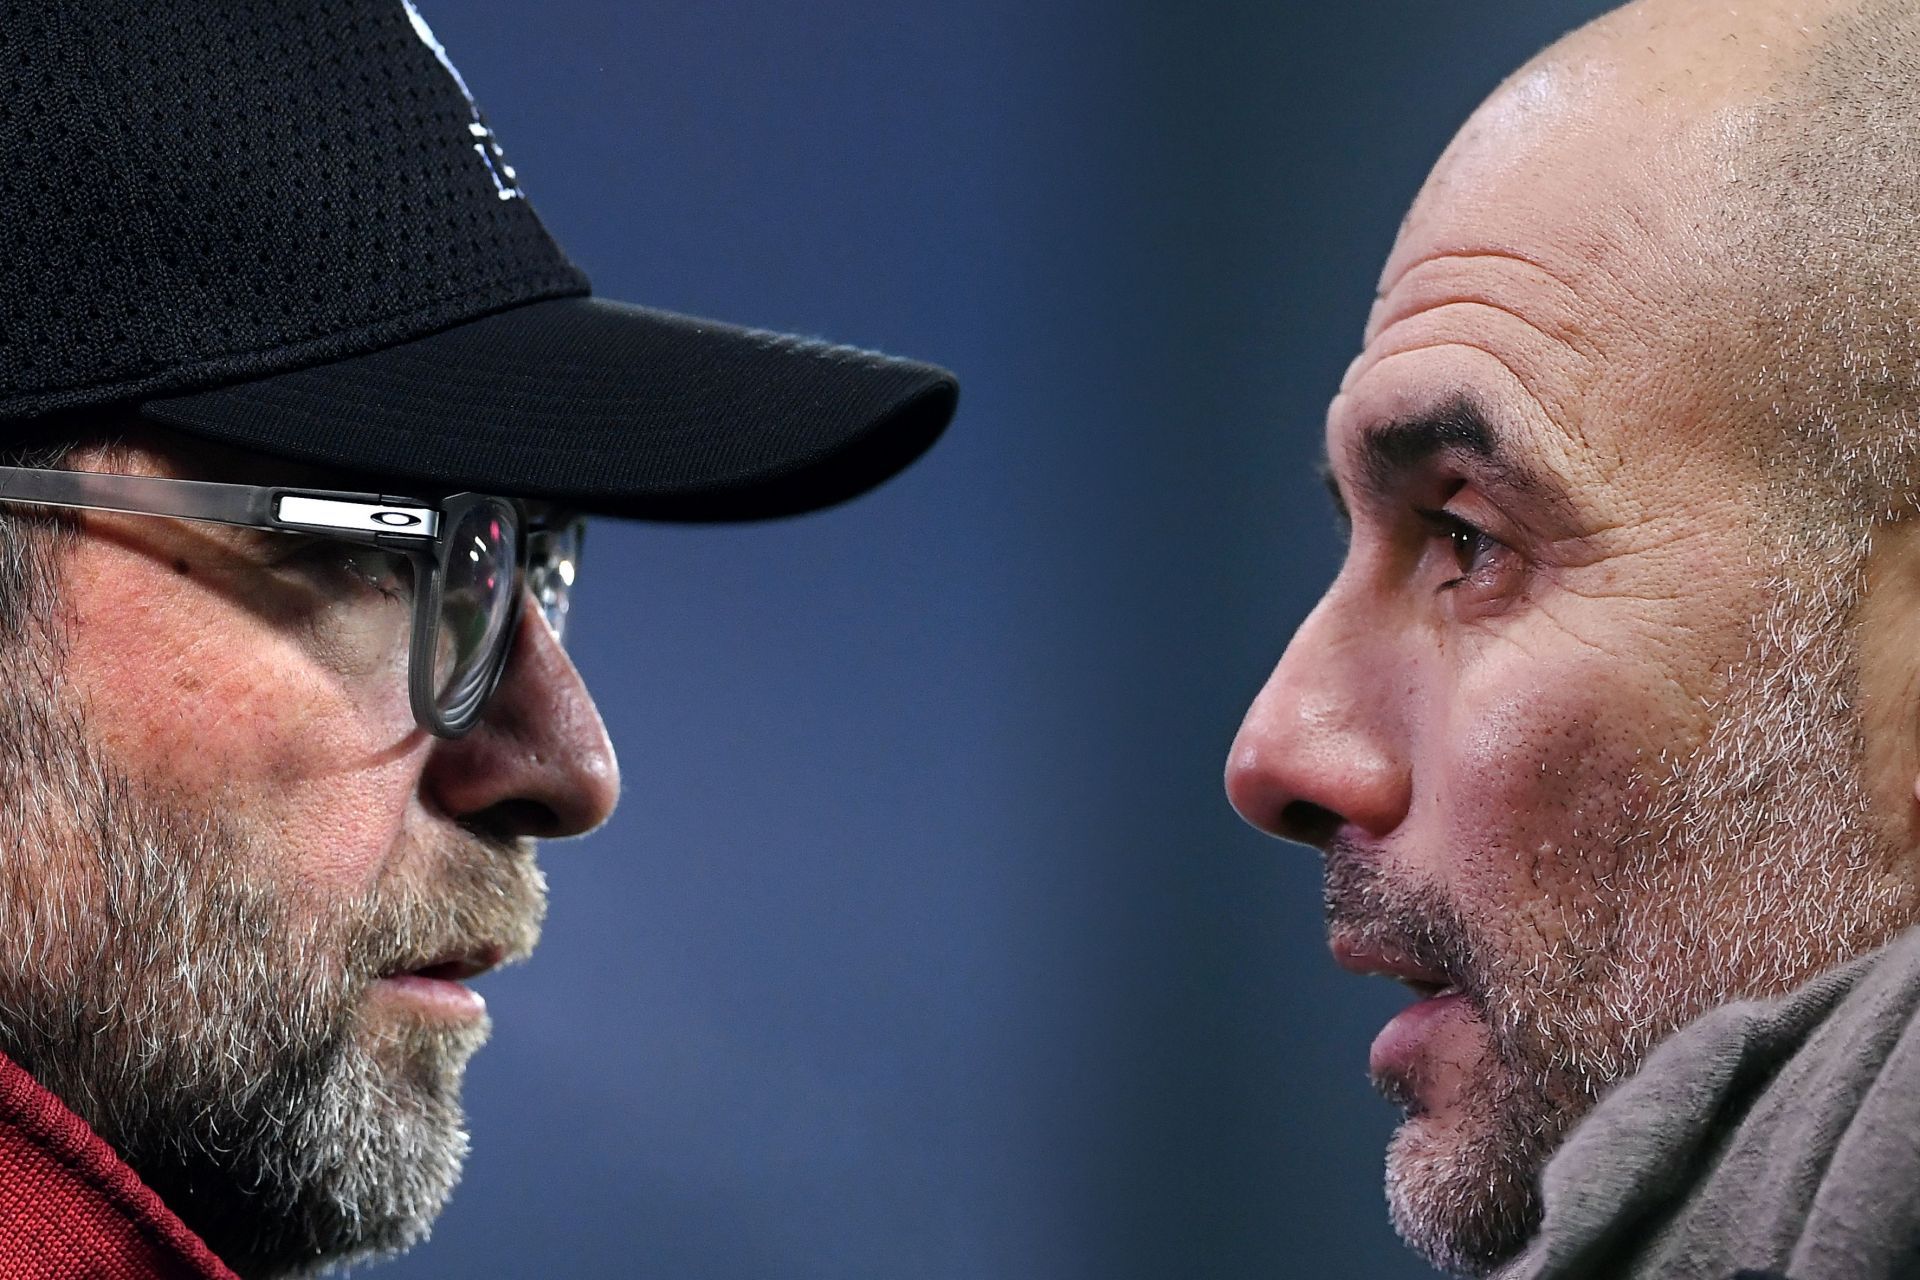 Jurgen Klopp and Pep Guardiola have battled it out at the top of the Premier League